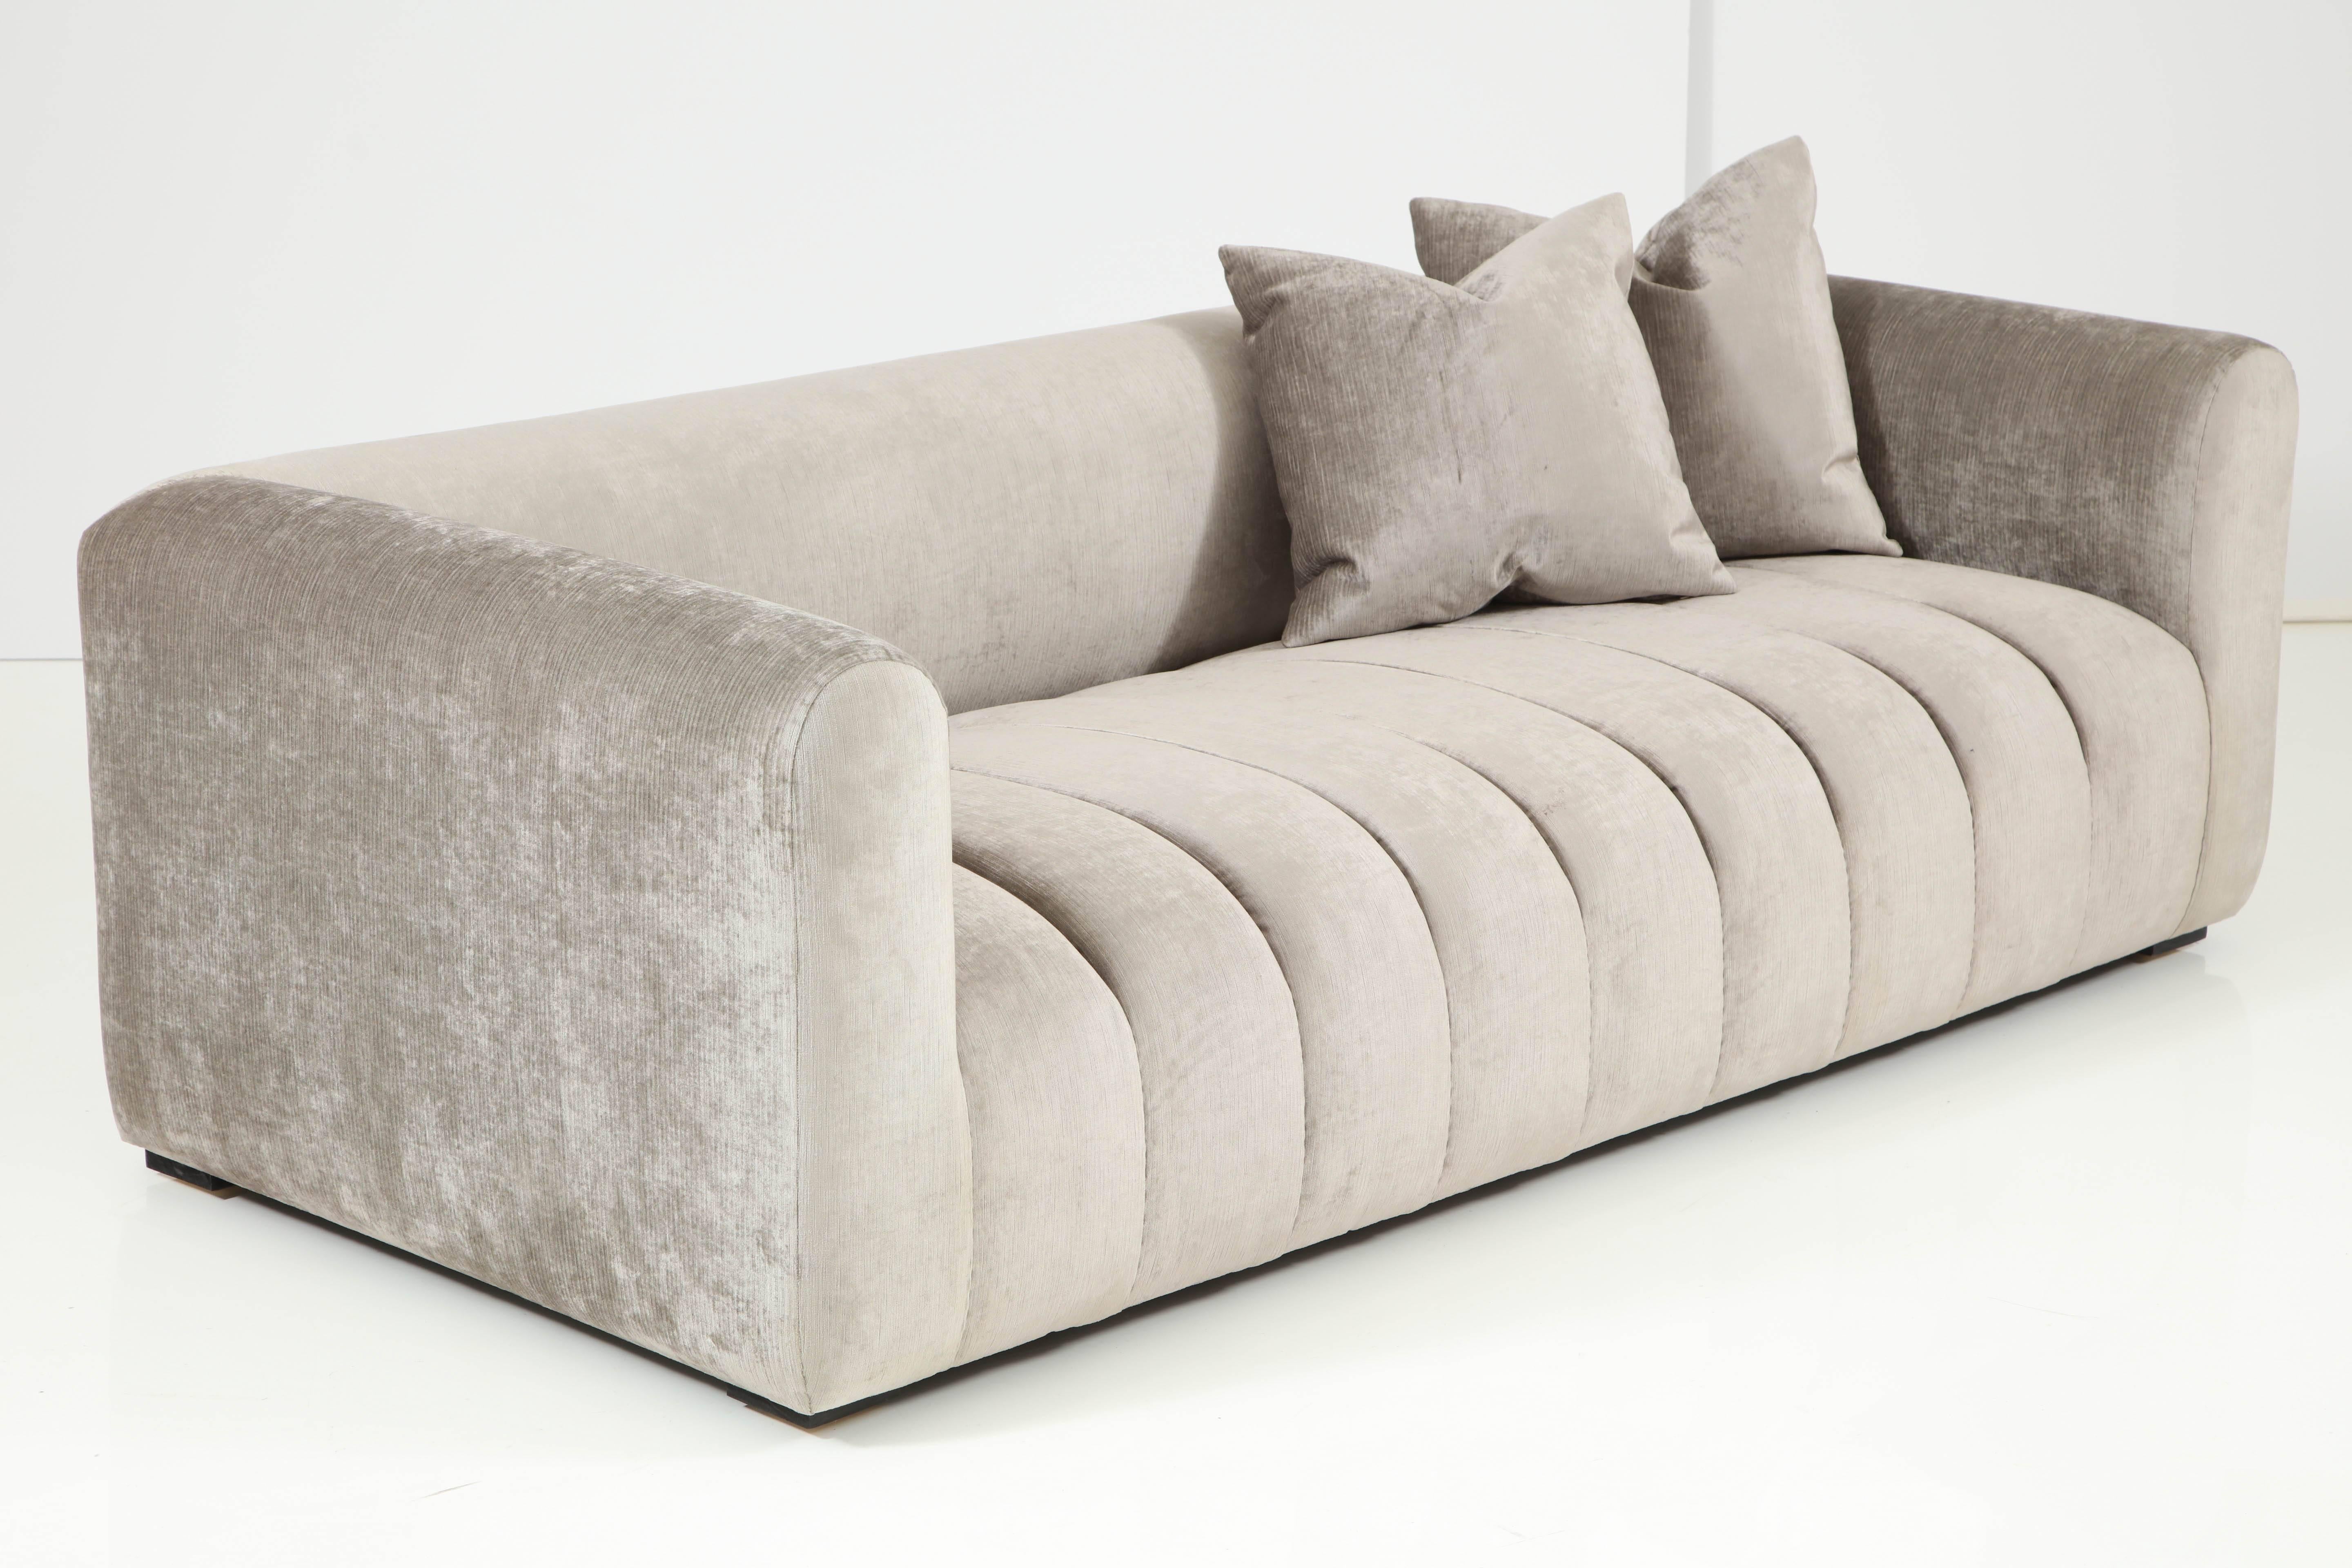 Stunning Channel Sofa by Steve Chase offered by Prime Gallery 1